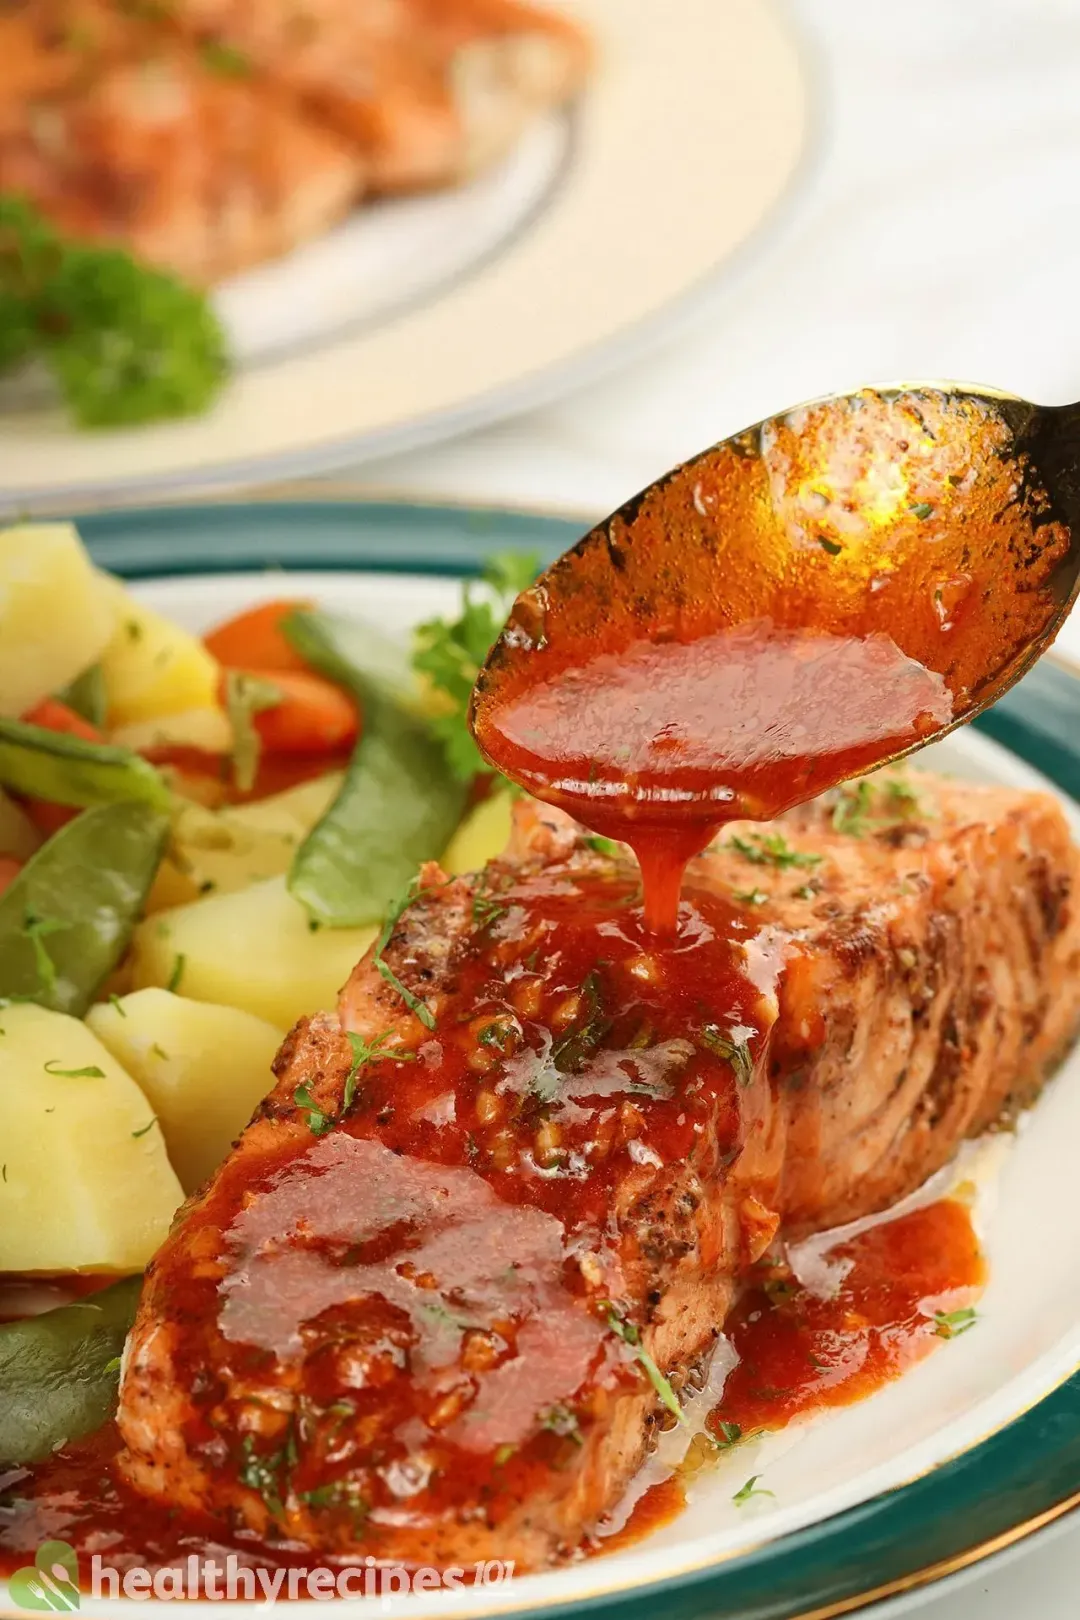 A close-up picture of Instant Pot salmon drizzled with a spicy sauce and served with some cooked vegetables on the side